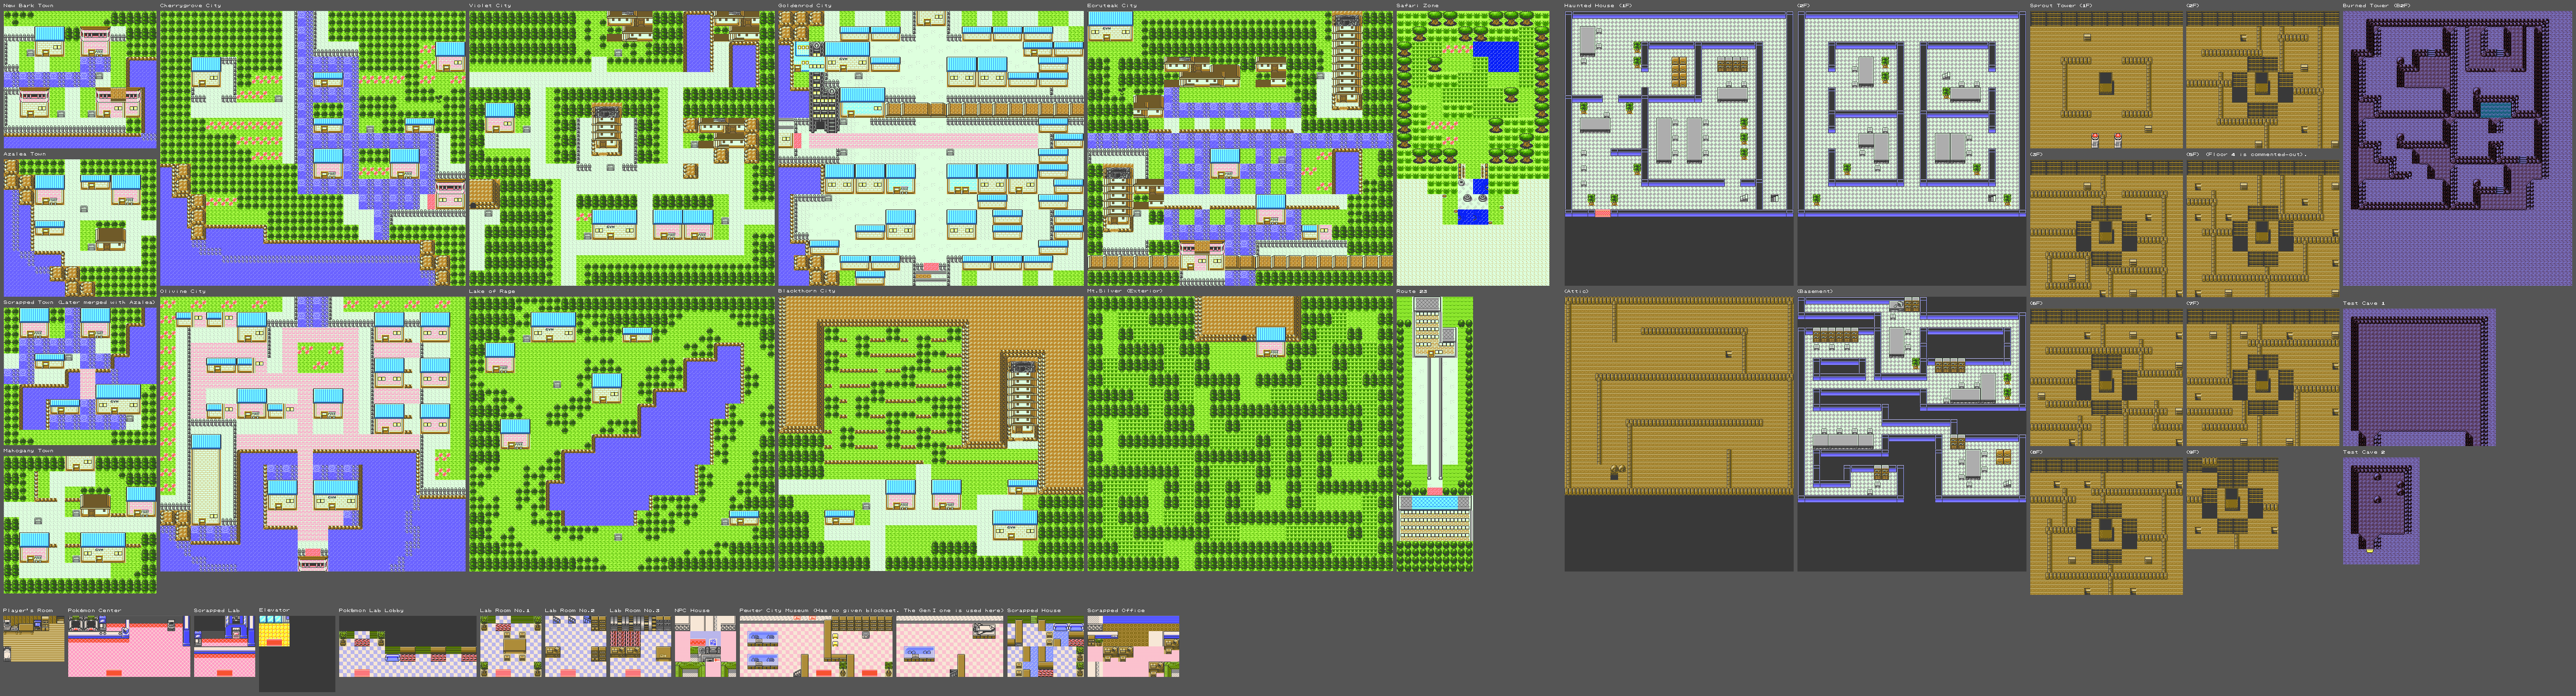 Pokemon Crystal Version Type Chart Map for Game Boy Color by Llamaman2 -  GameFAQs